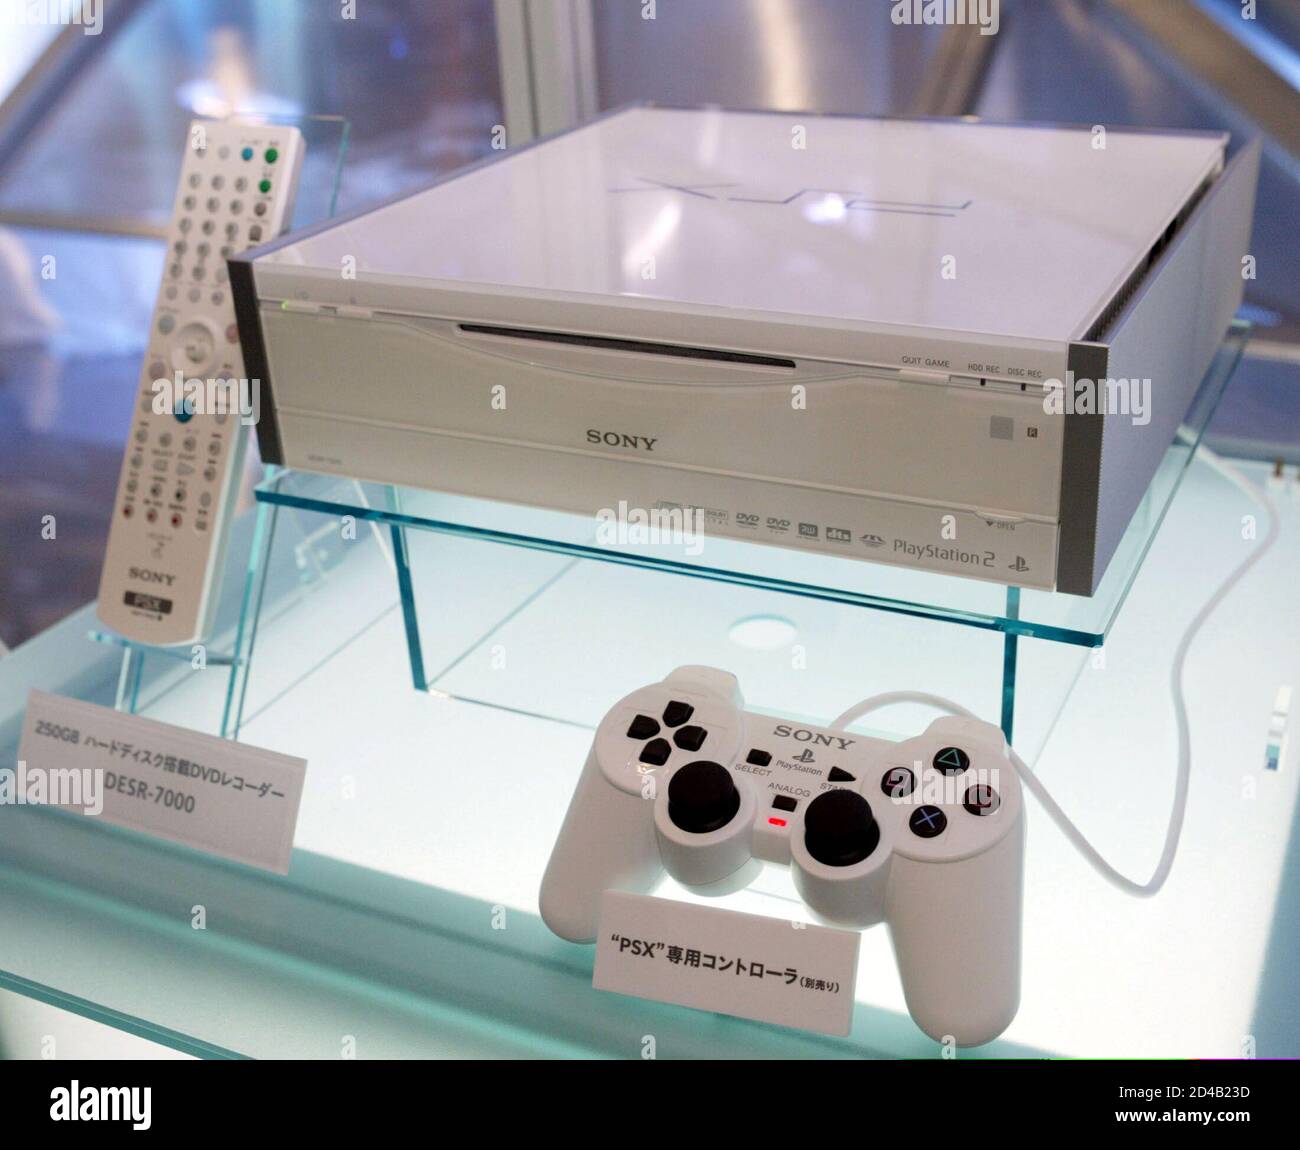 Sony Corp displays the new game machine "PSX DESR-7000", the next  generation PlayStation, during the CEATEC JAPAN 2003 technology trade  exhibition at Makuhari Messe in Chiba, east of Tokyo October 7, 2003. [